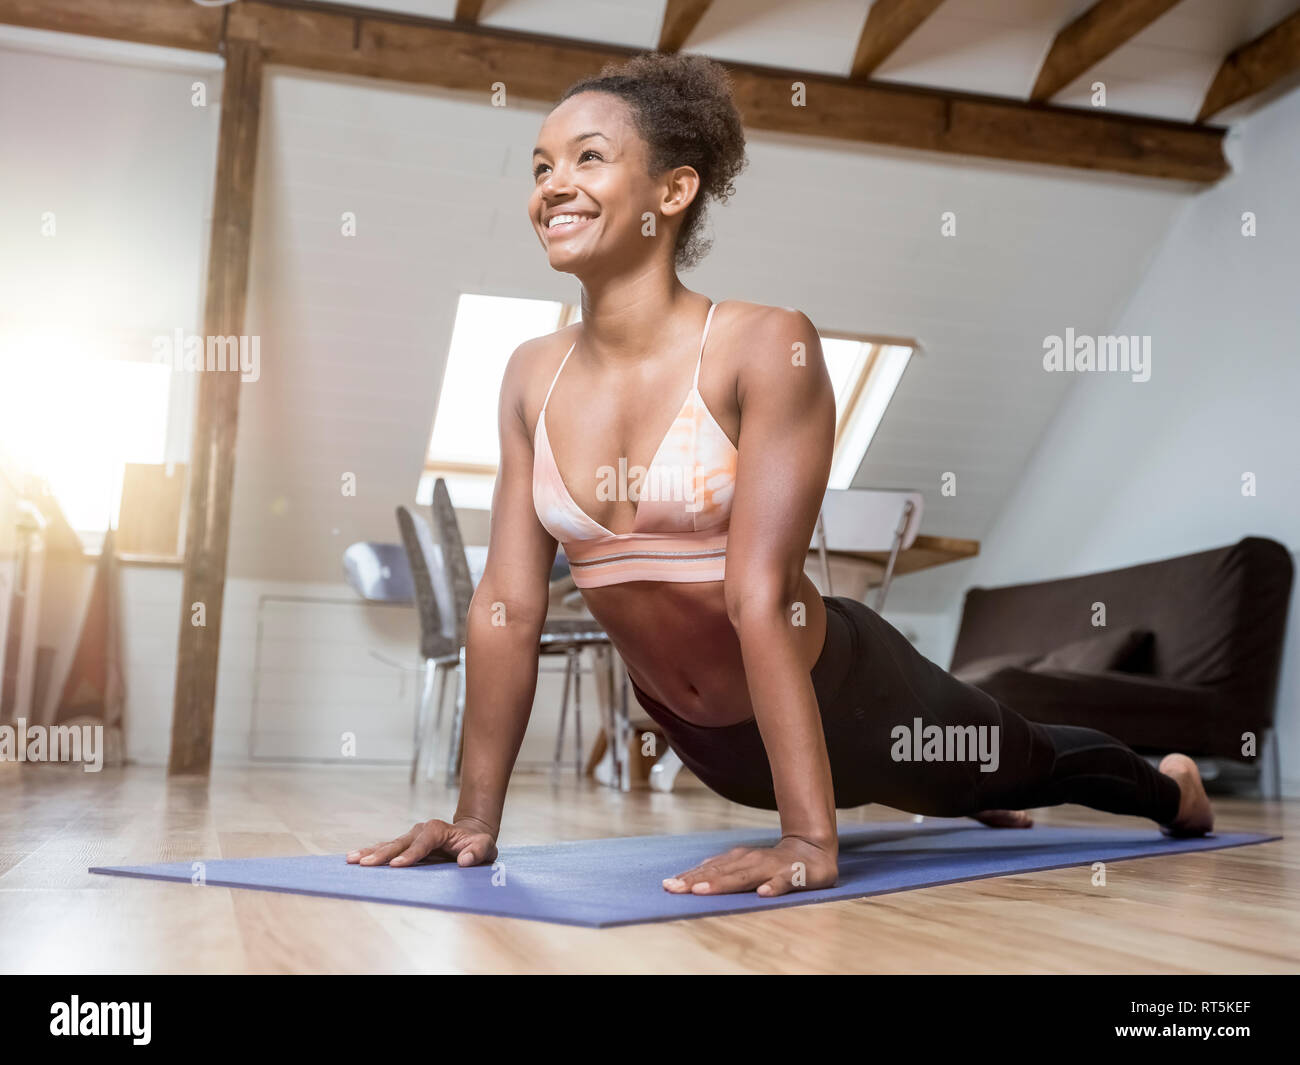 Smiling young woman practicing yoga Banque D'Images